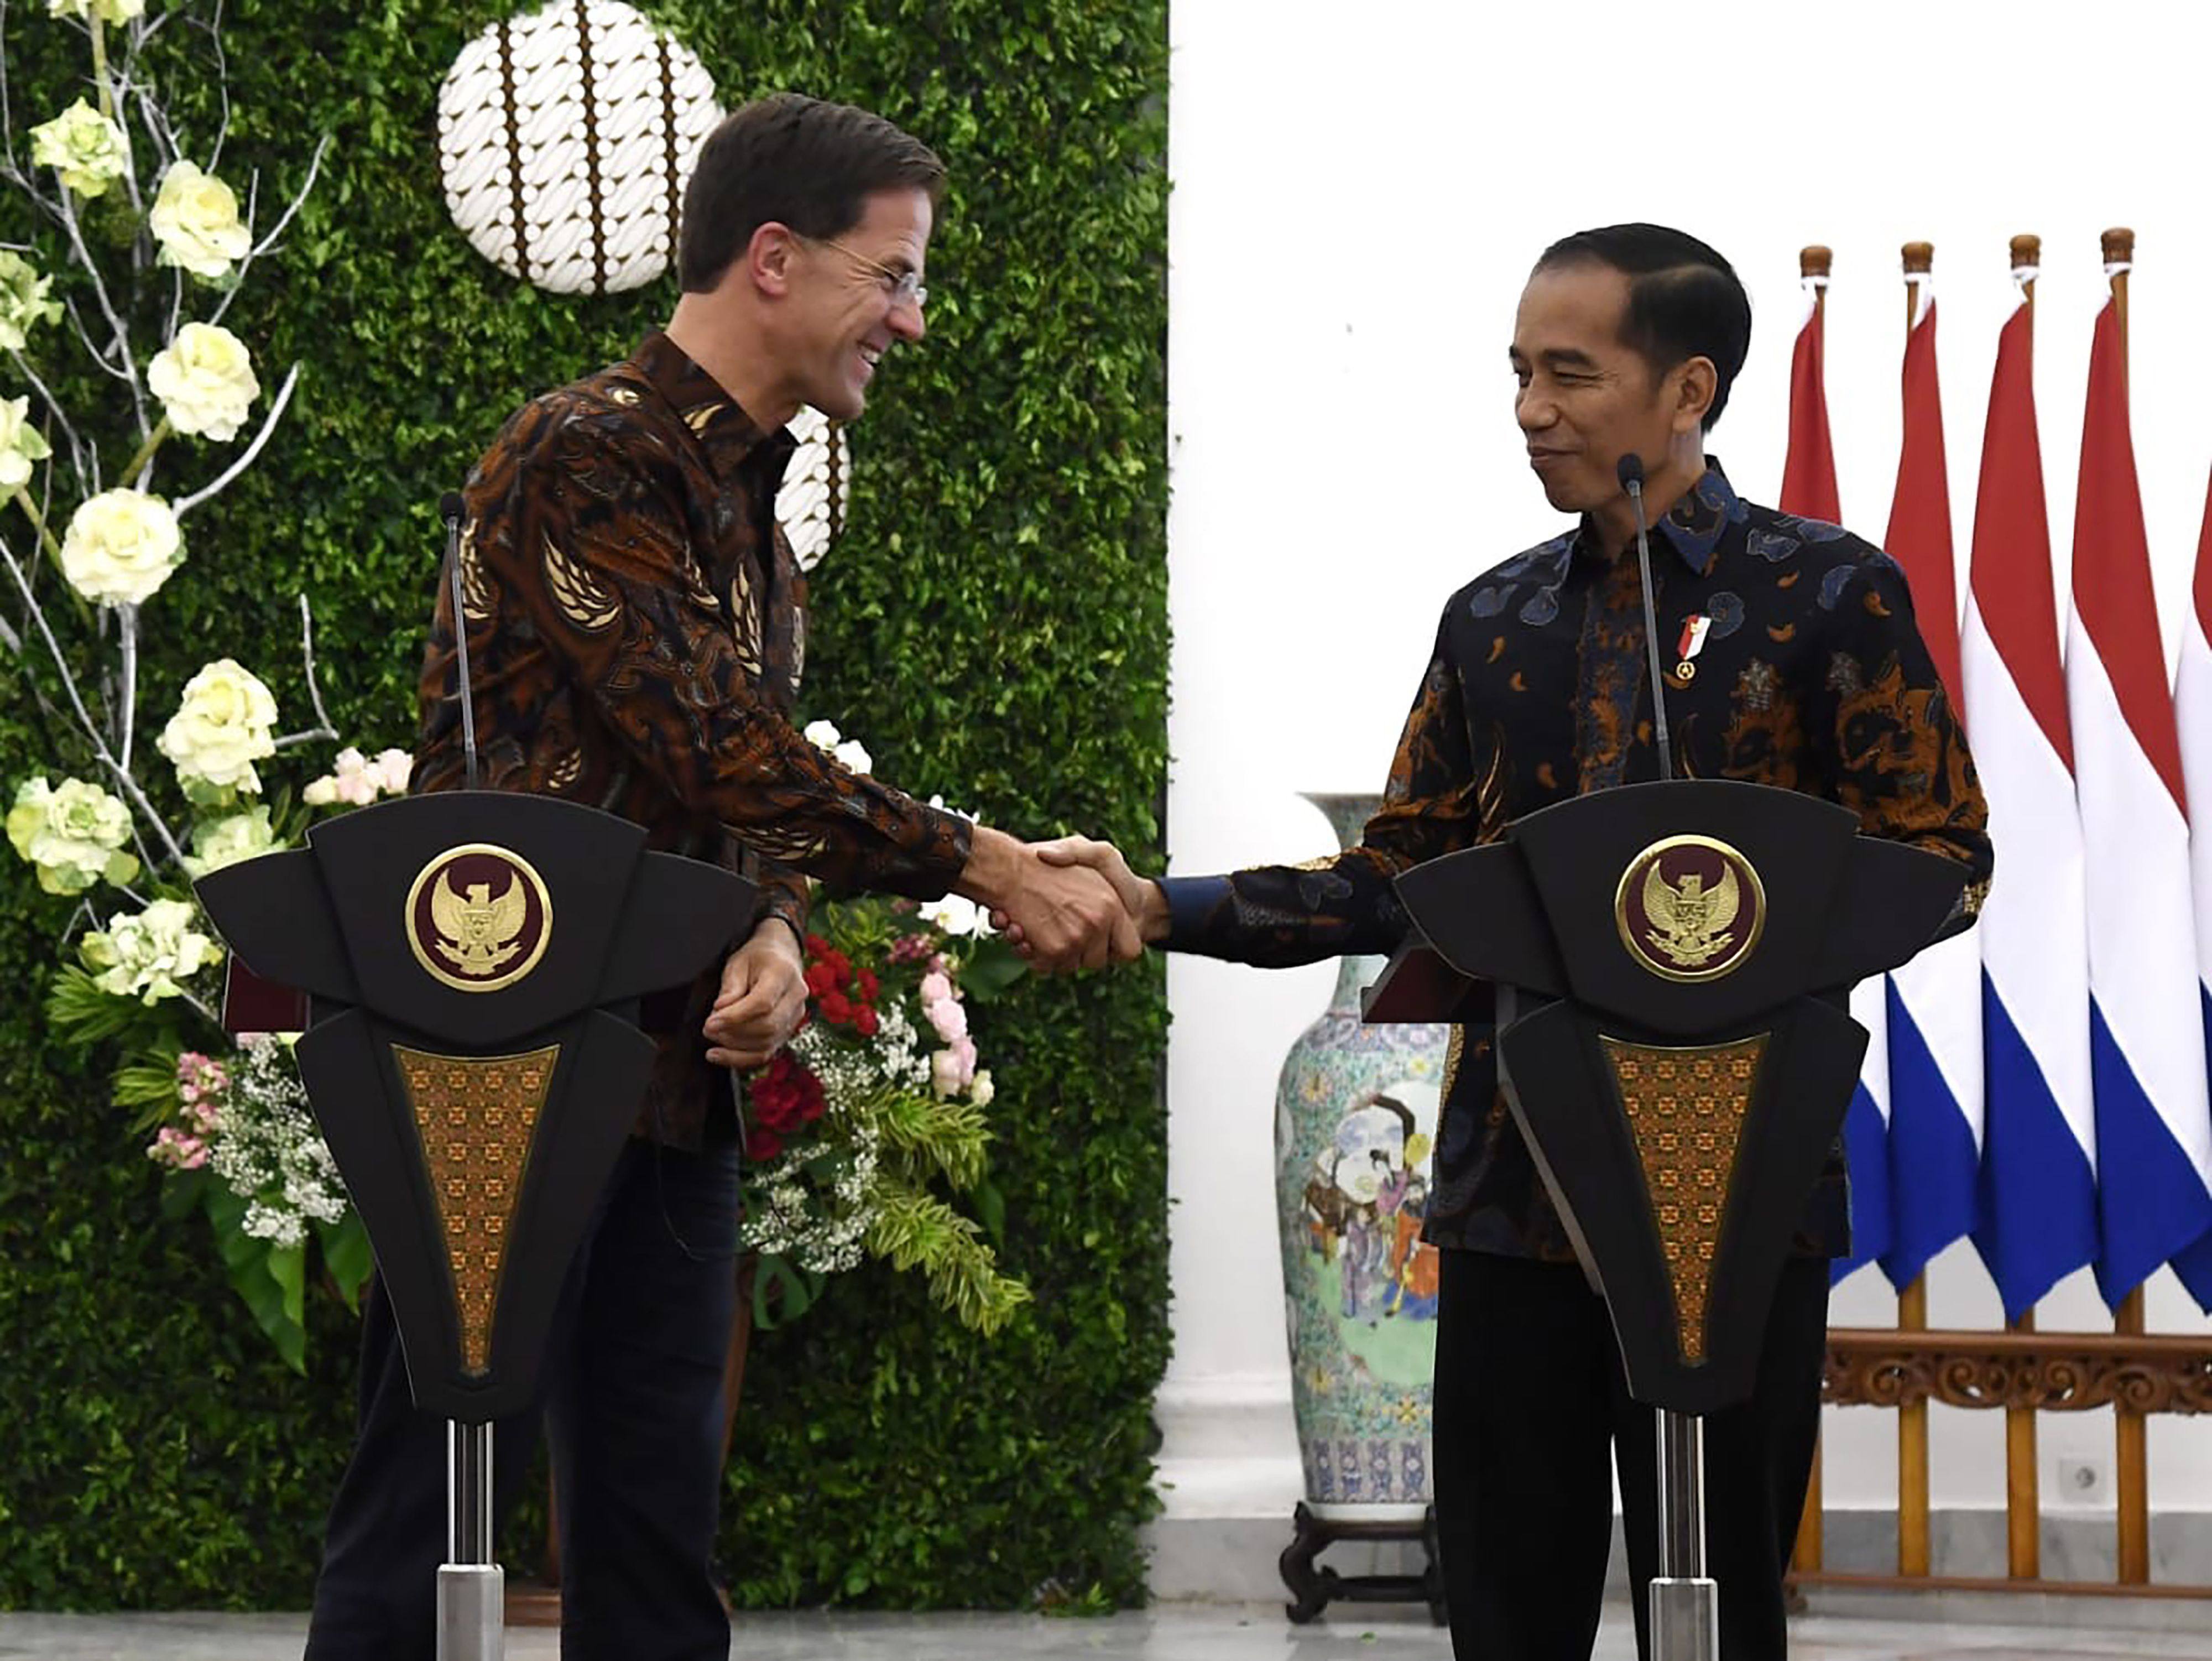 Netherlands Prime Minister Mark Rutte (left) with Indonesian President Joko Widodo at Bogor Palace on the outskirts of Jakarta in 2019. Photo: Indonesian Presidential Palace/AFP